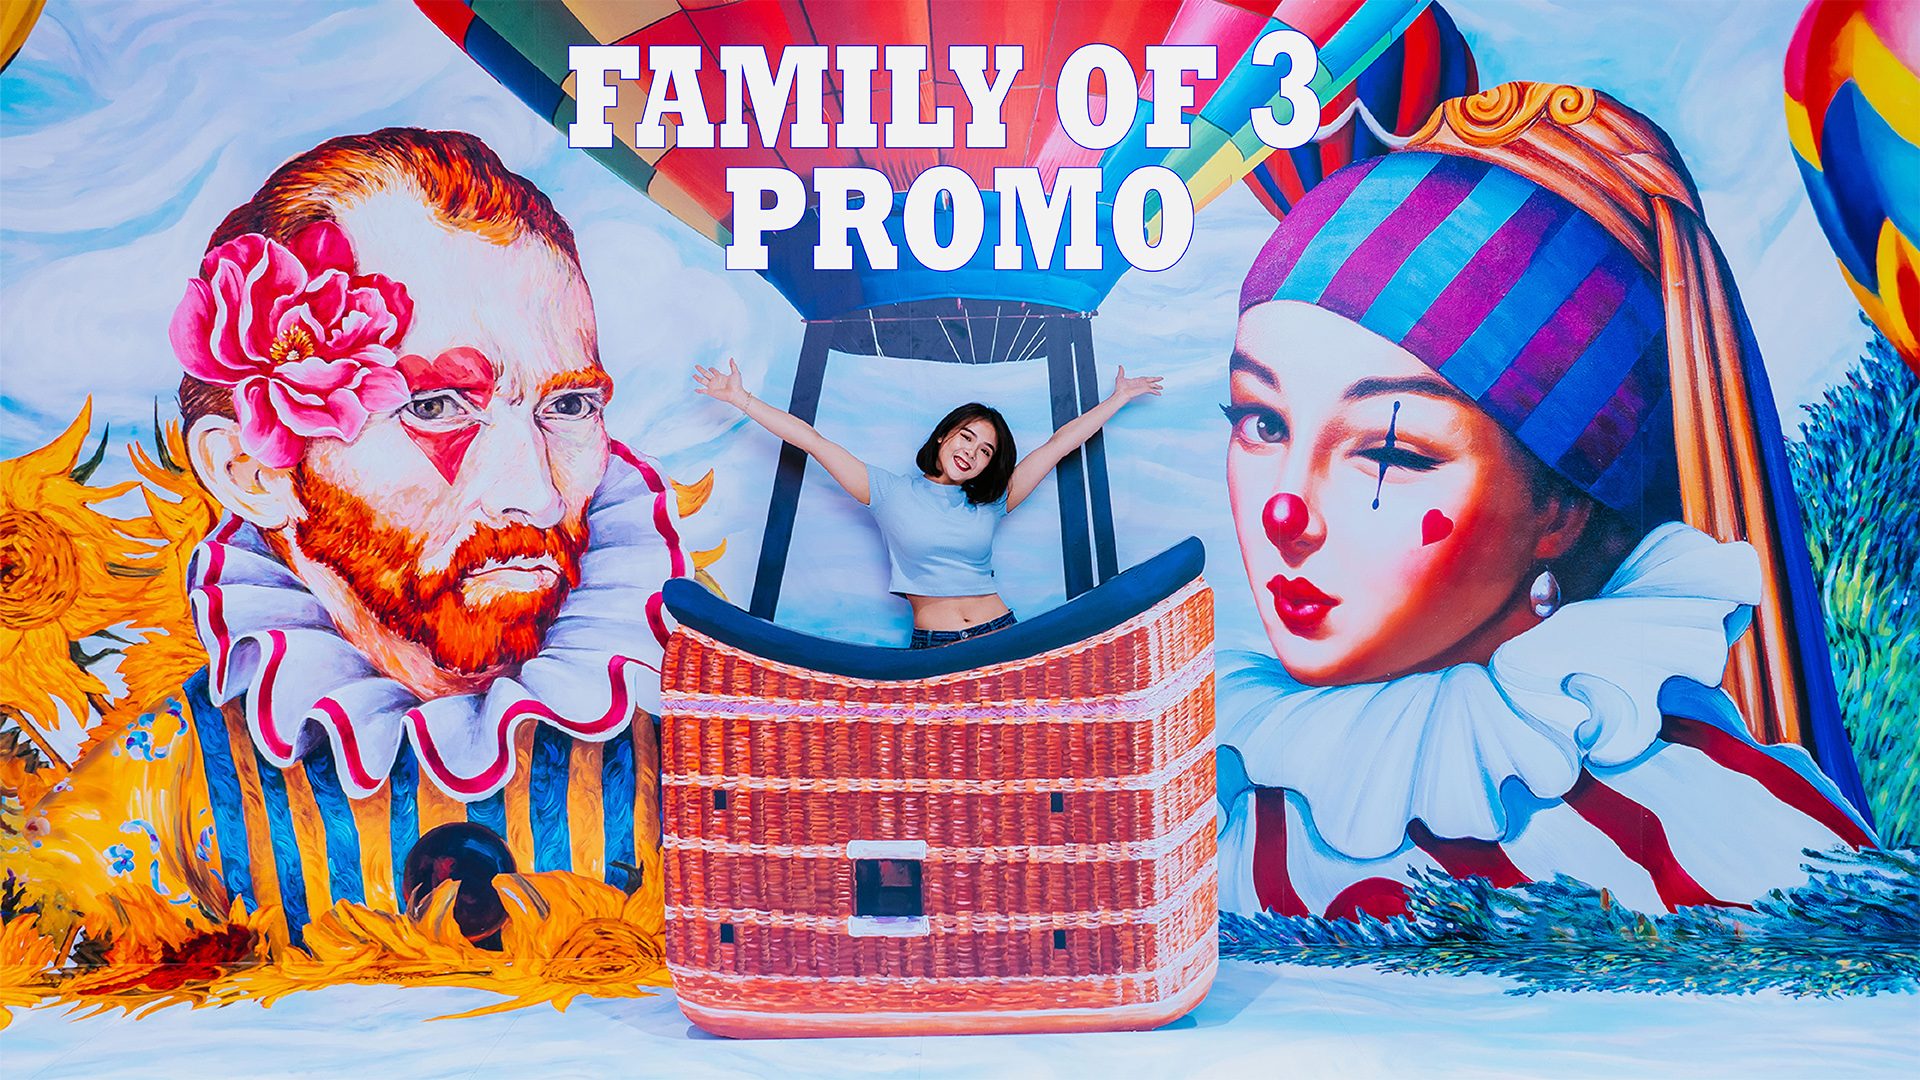 PROMO: Family of 3 [2 Adults + 1 Child] - 25% off Admission Tickets